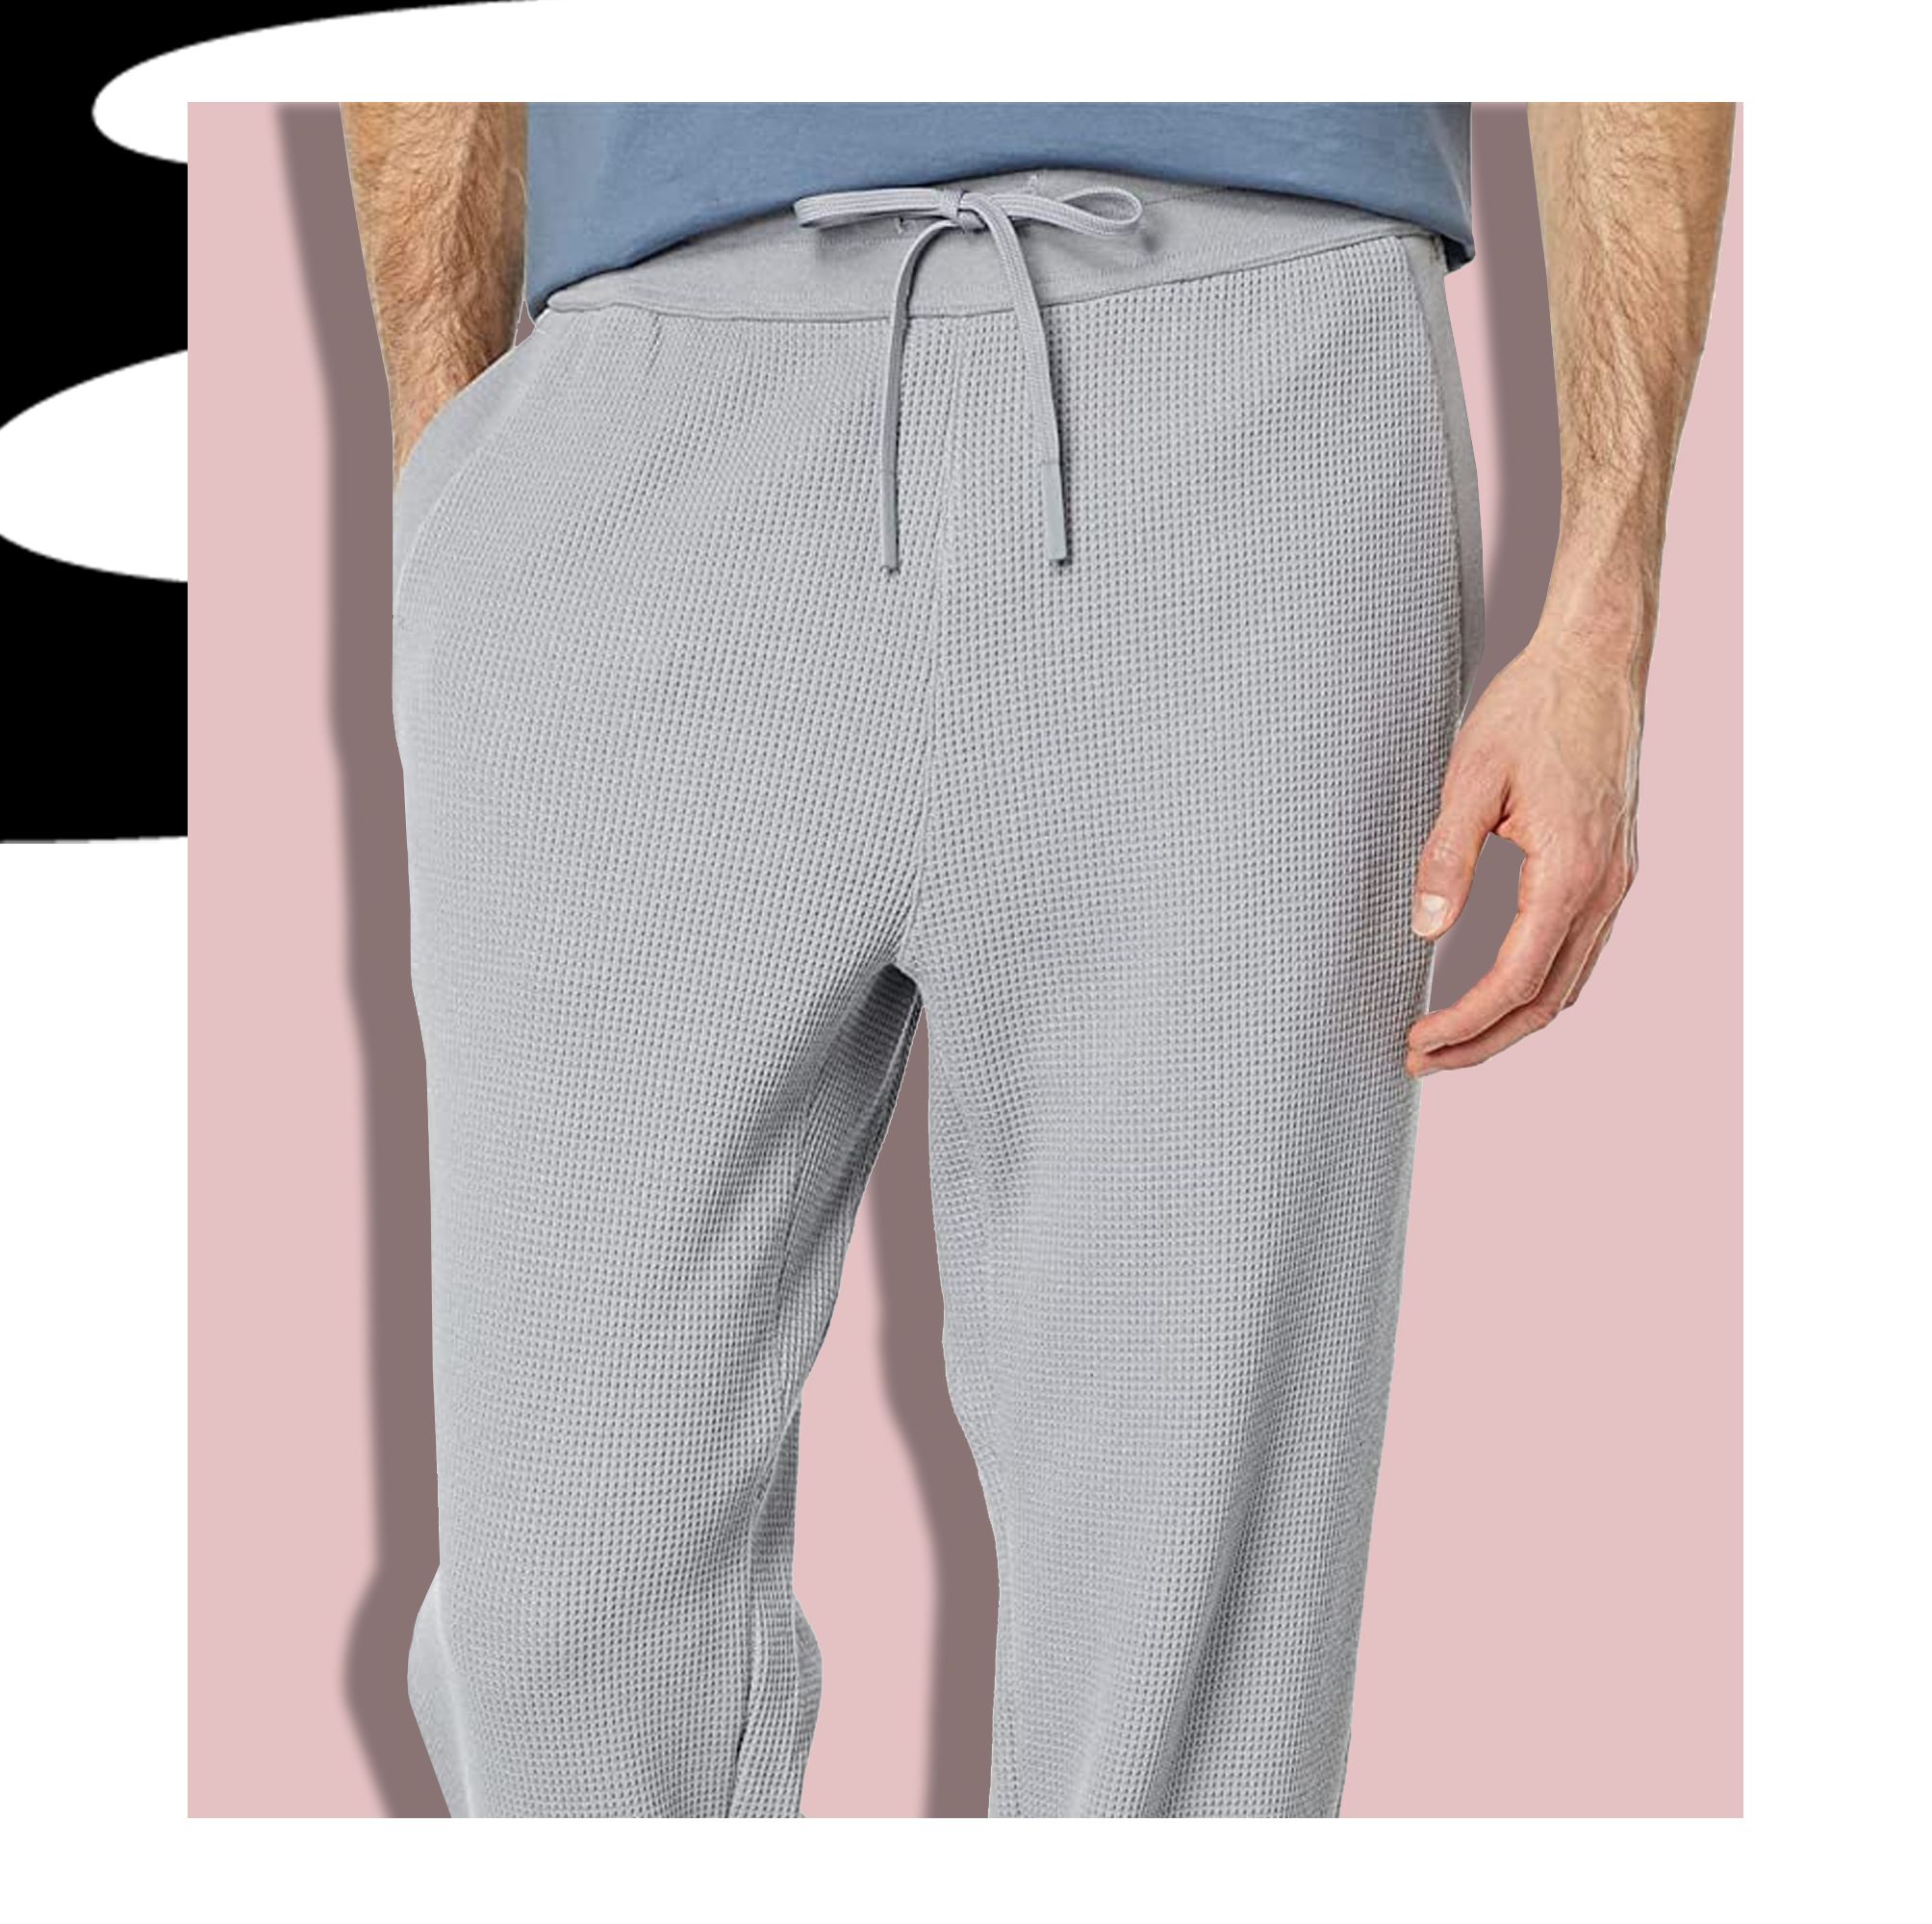 The 20 Best Sweatpants You Can Score on Amazon